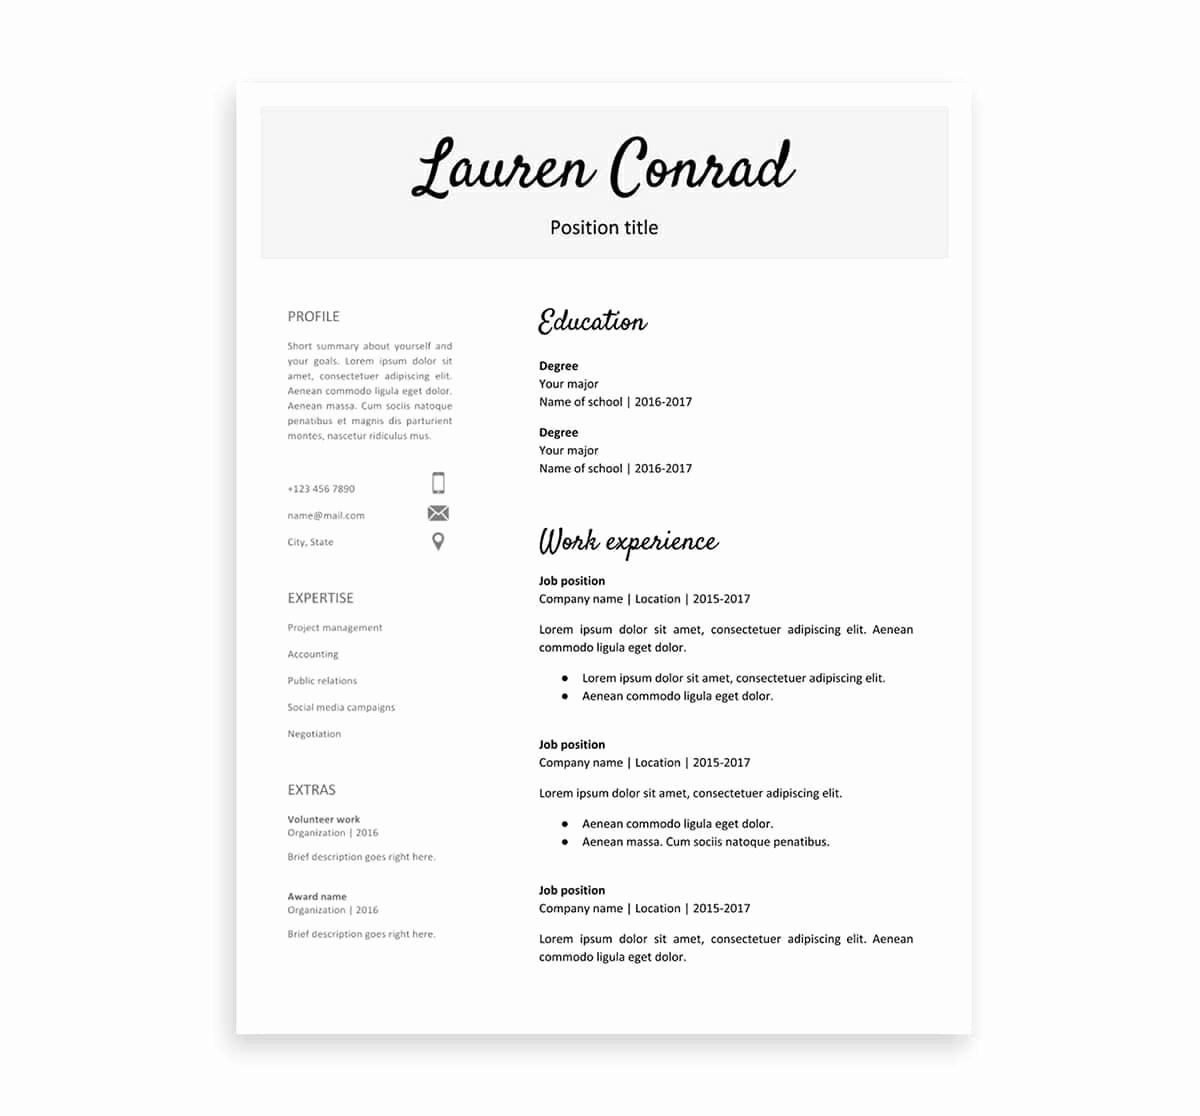 Google Docs Resume Templates 10 Examples to Download